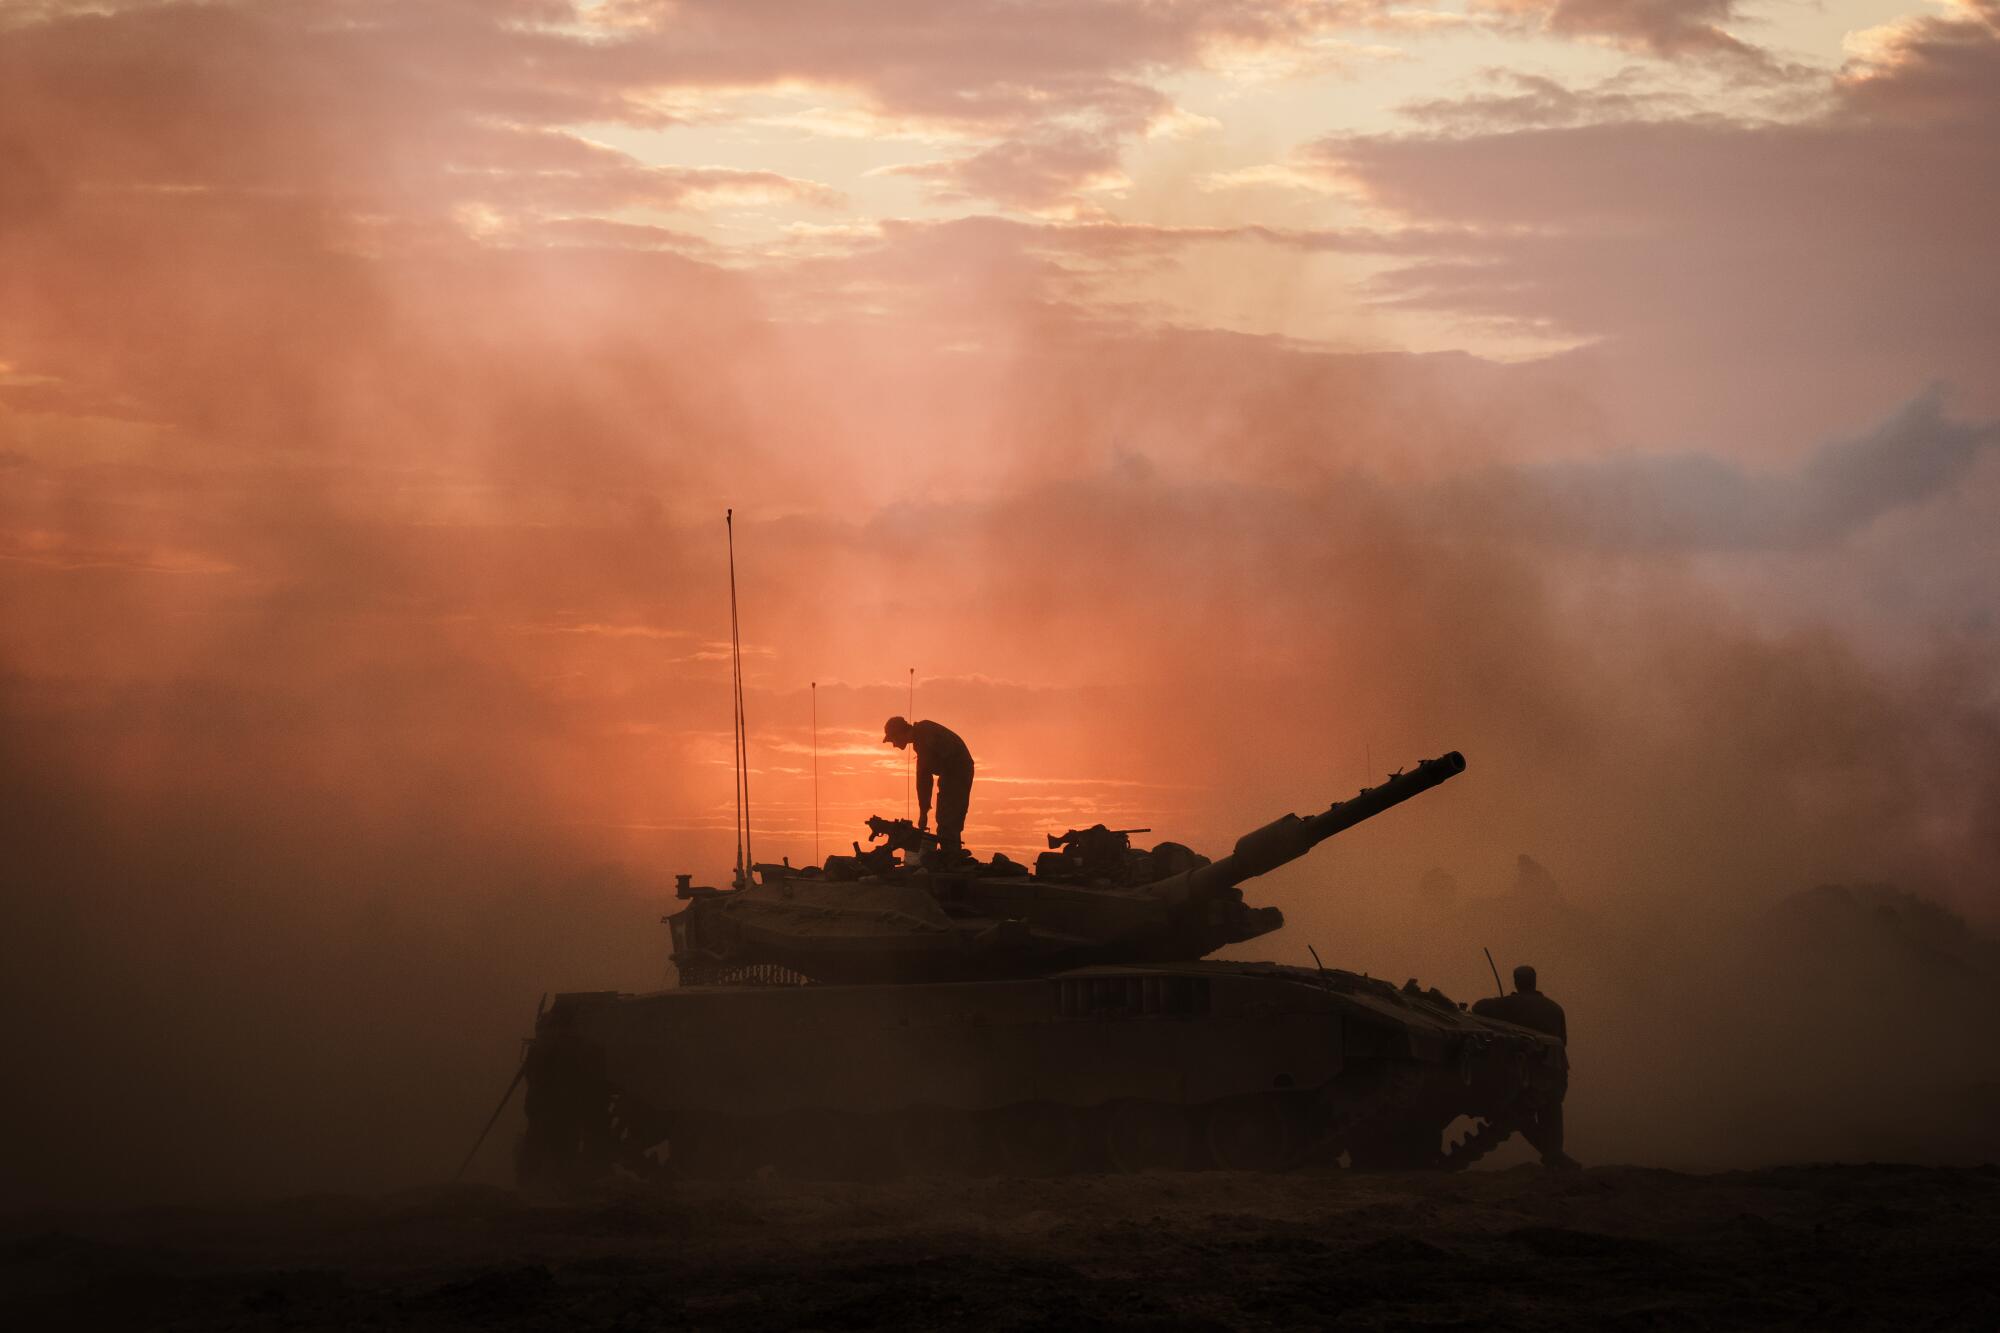 A silhouette of a person atop a tank against orange smoky skies